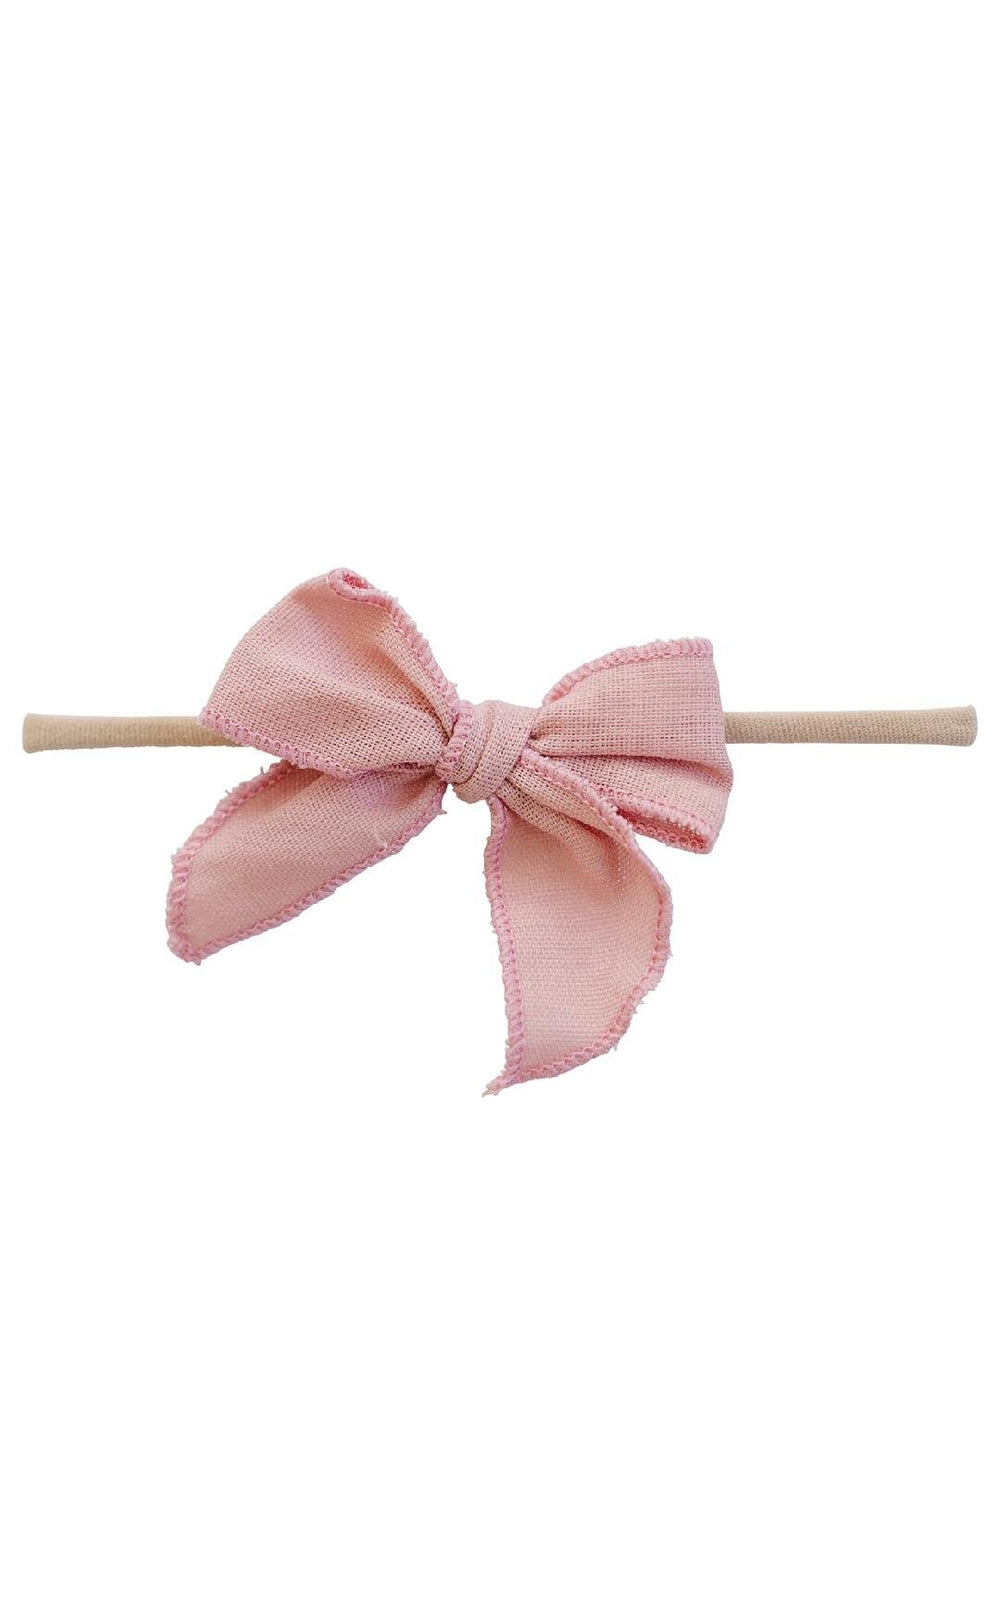 Edged Bow | Dusty Pink